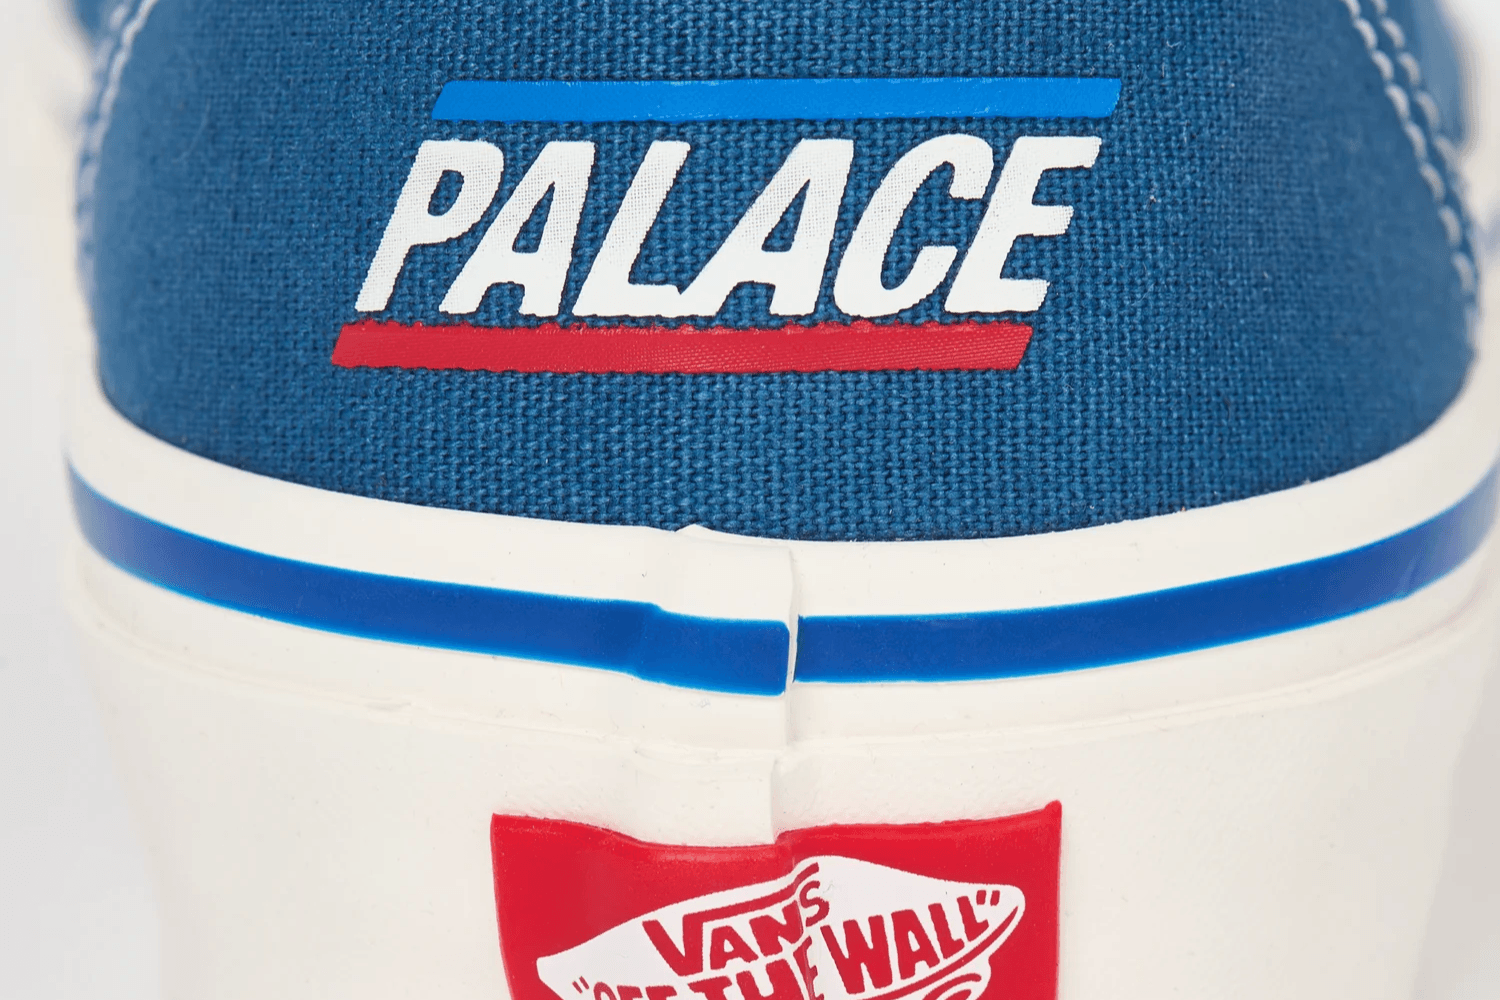 Palace unveils three colorways of the Vans Authentic